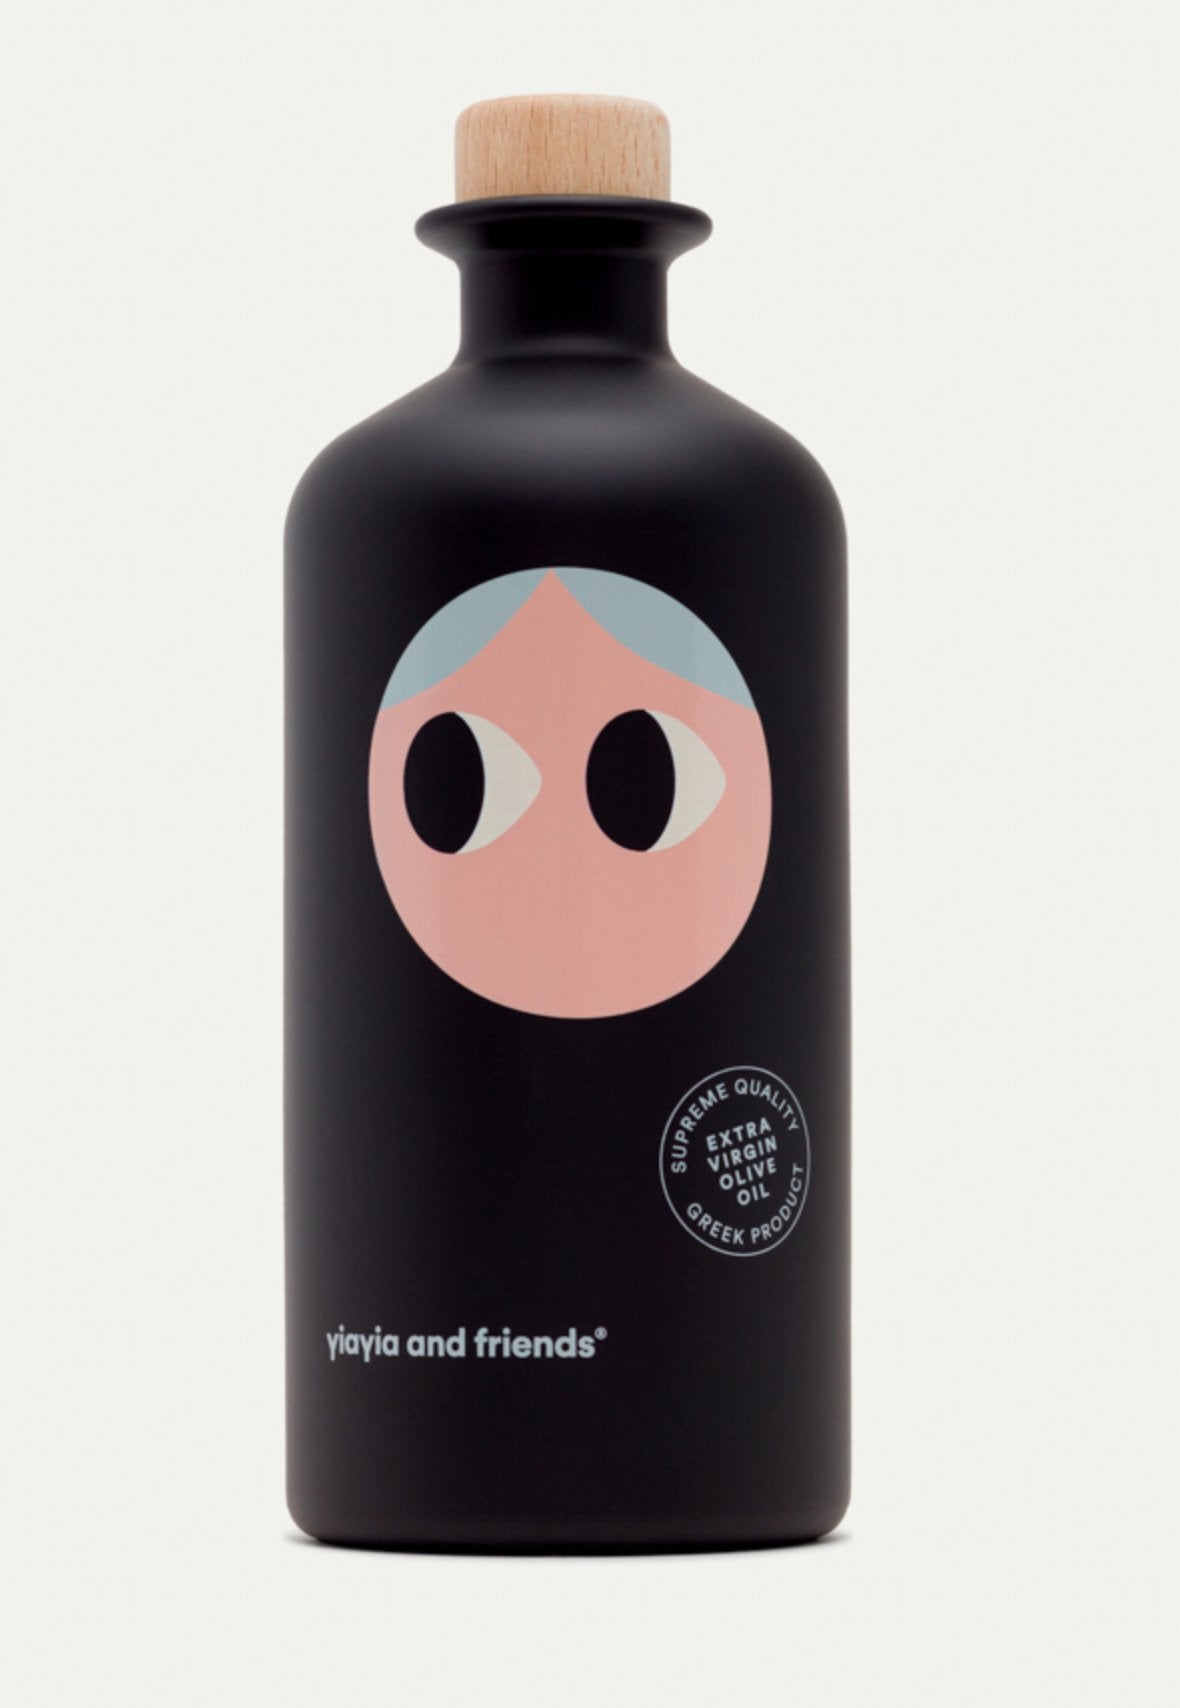 YIAYIA AND FRIENDS Extra Virgin Olive Oil 500ml - Preston Apothecary